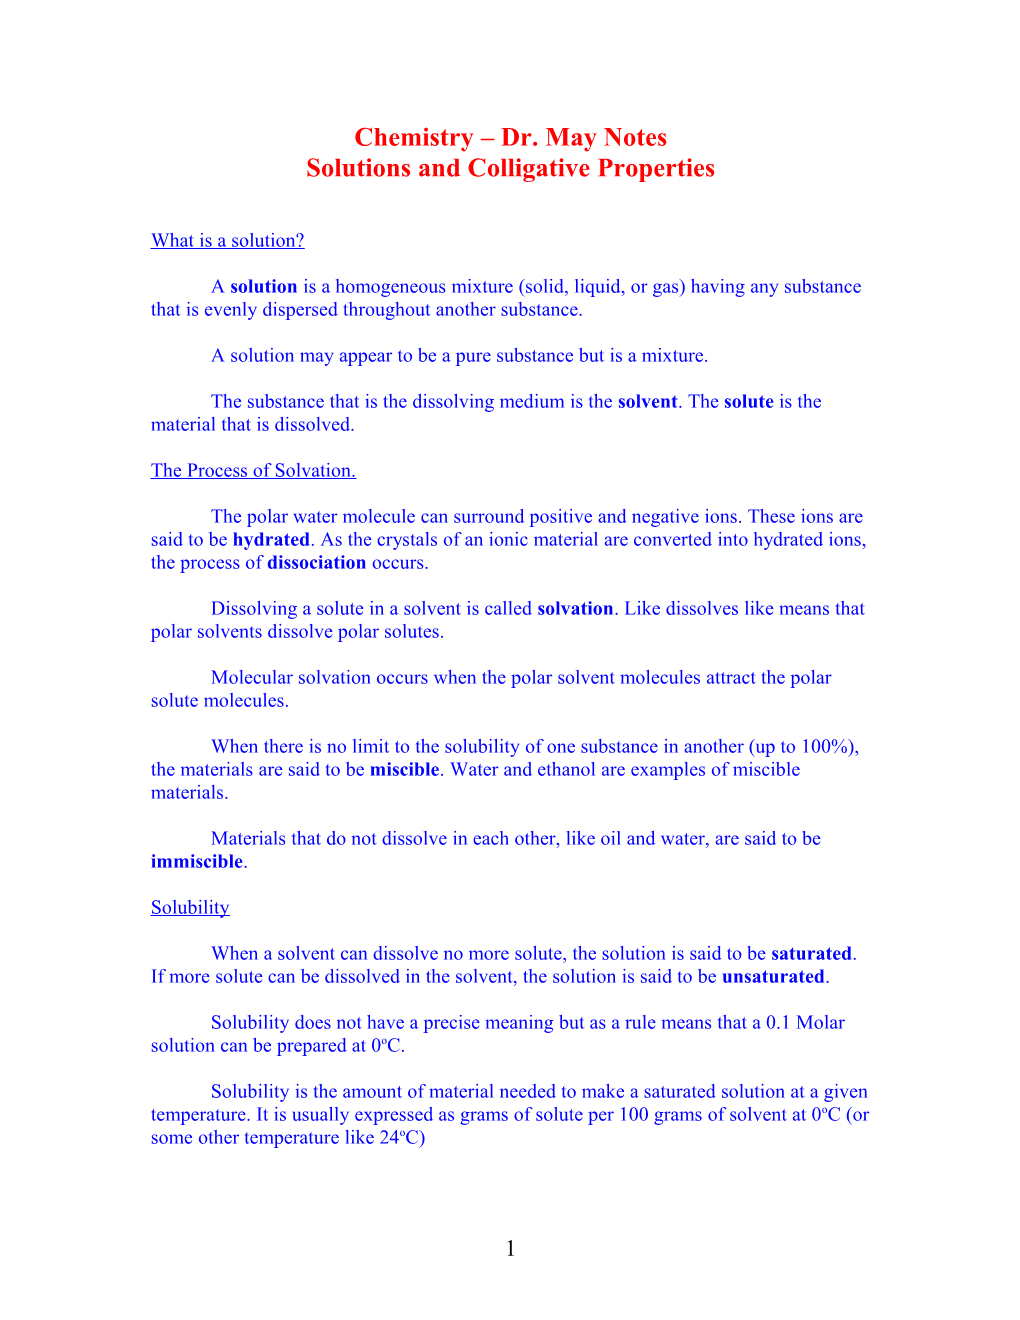 Solutions and Colligative Properties